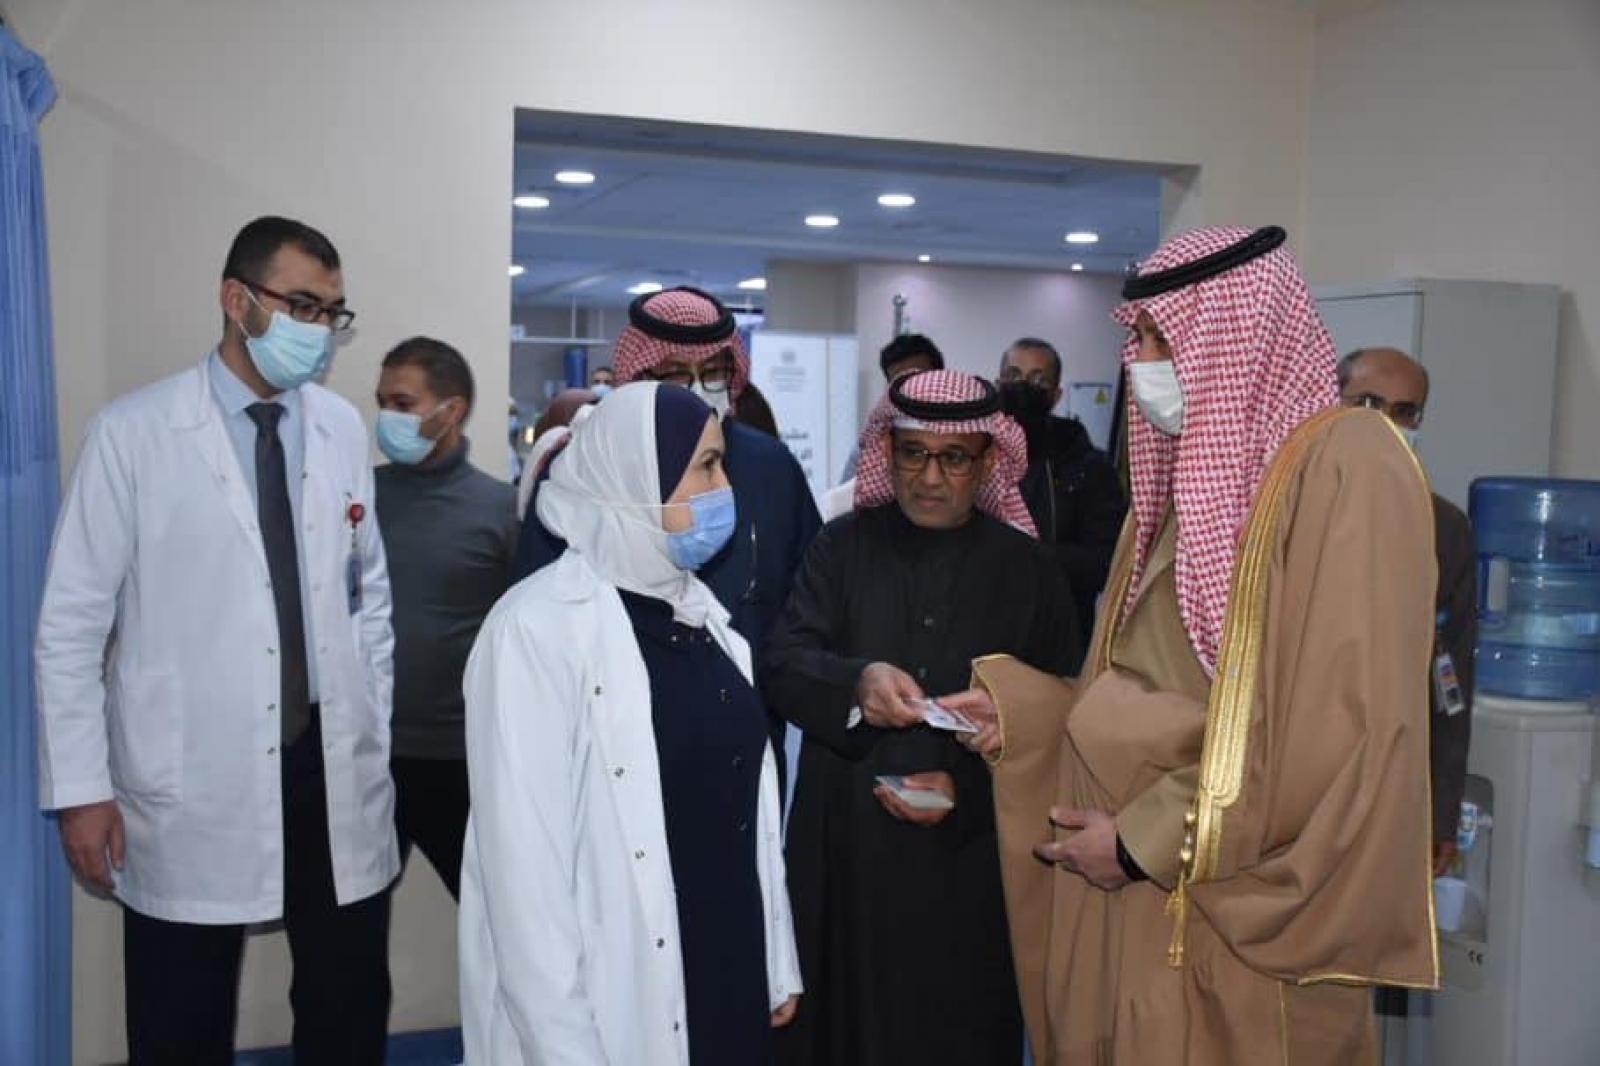 We were honored by a kind visit from His Excellency the Saudi Ambassador